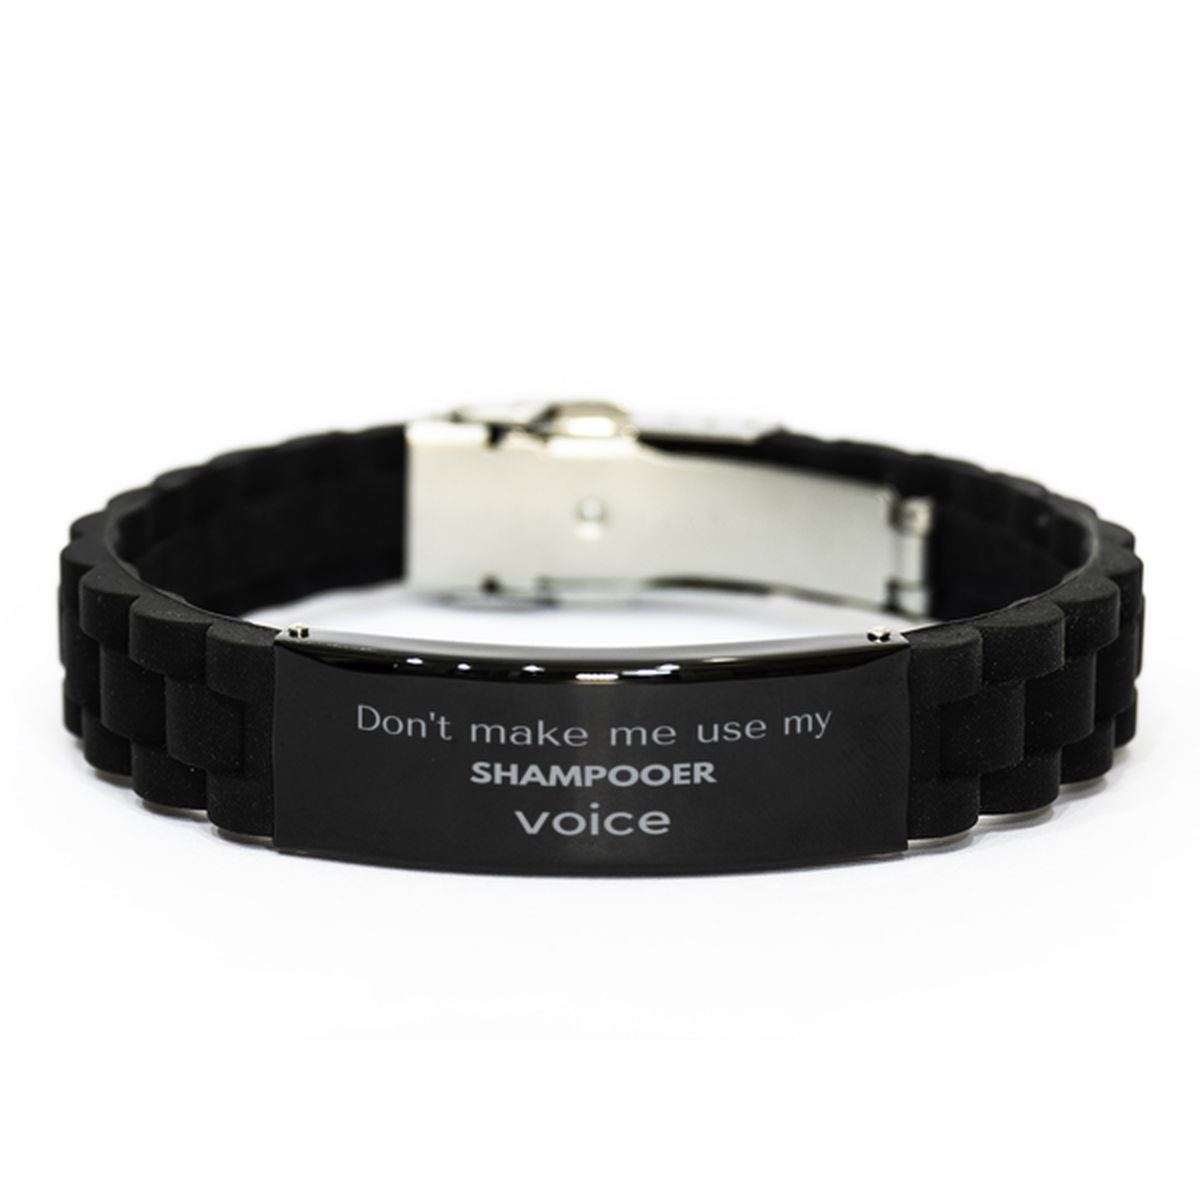 Don't make me use my Shampooer voice, Sarcasm Shampooer Gifts, Christmas Shampooer Black Glidelock Clasp Bracelet Birthday Unique Gifts For Shampooer Coworkers, Men, Women, Colleague, Friends